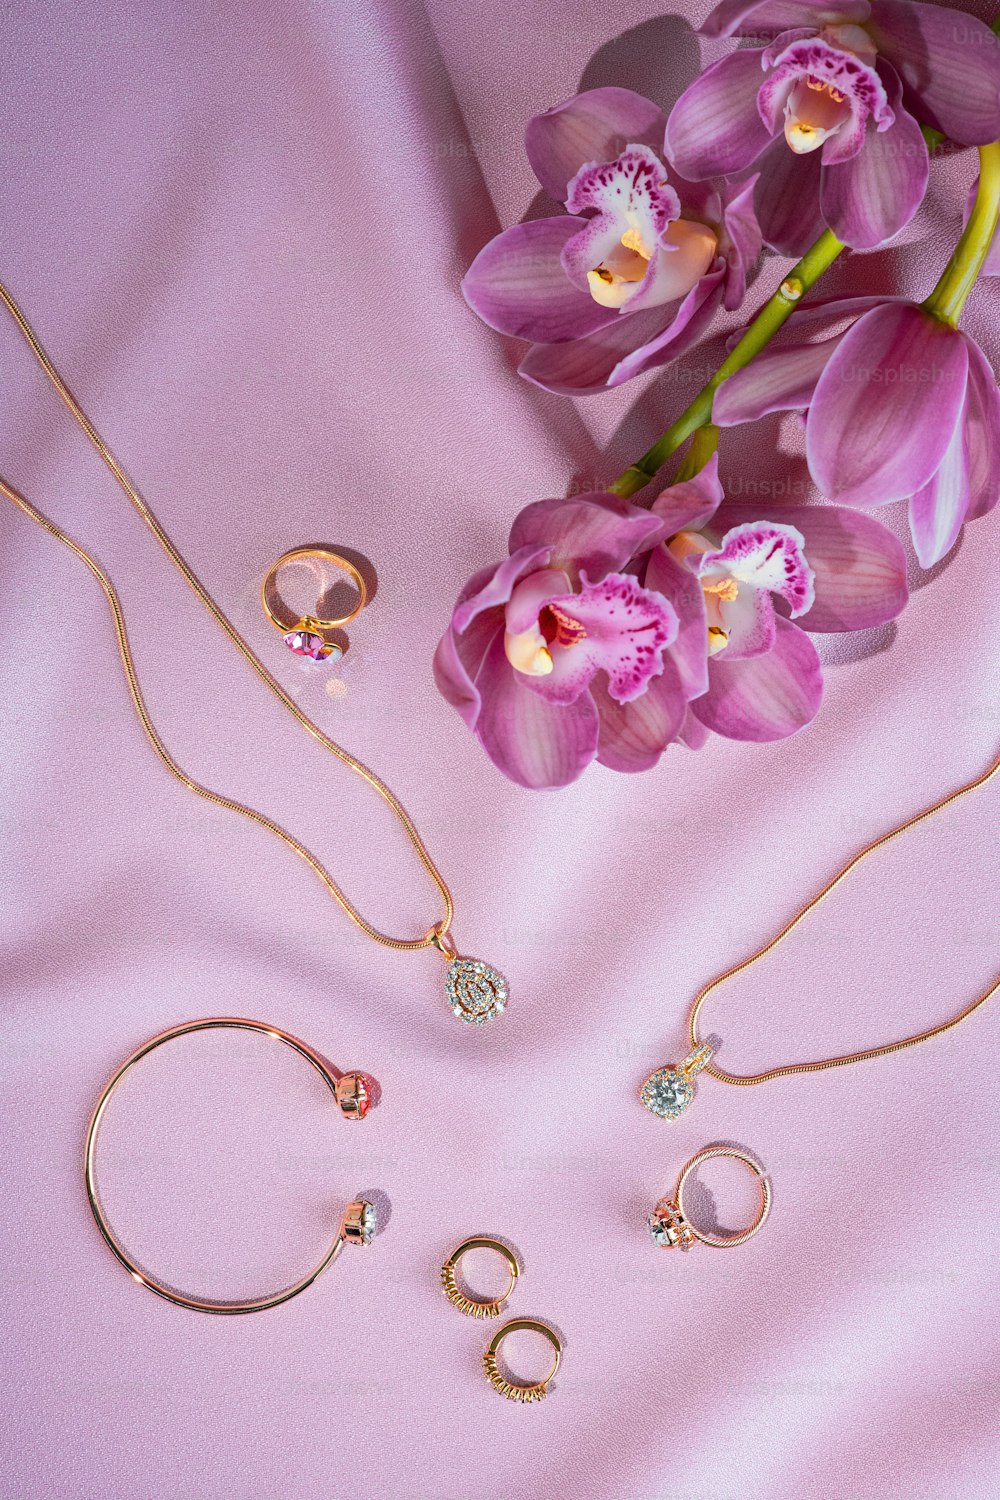 a bunch of jewelry laying on a pink surface